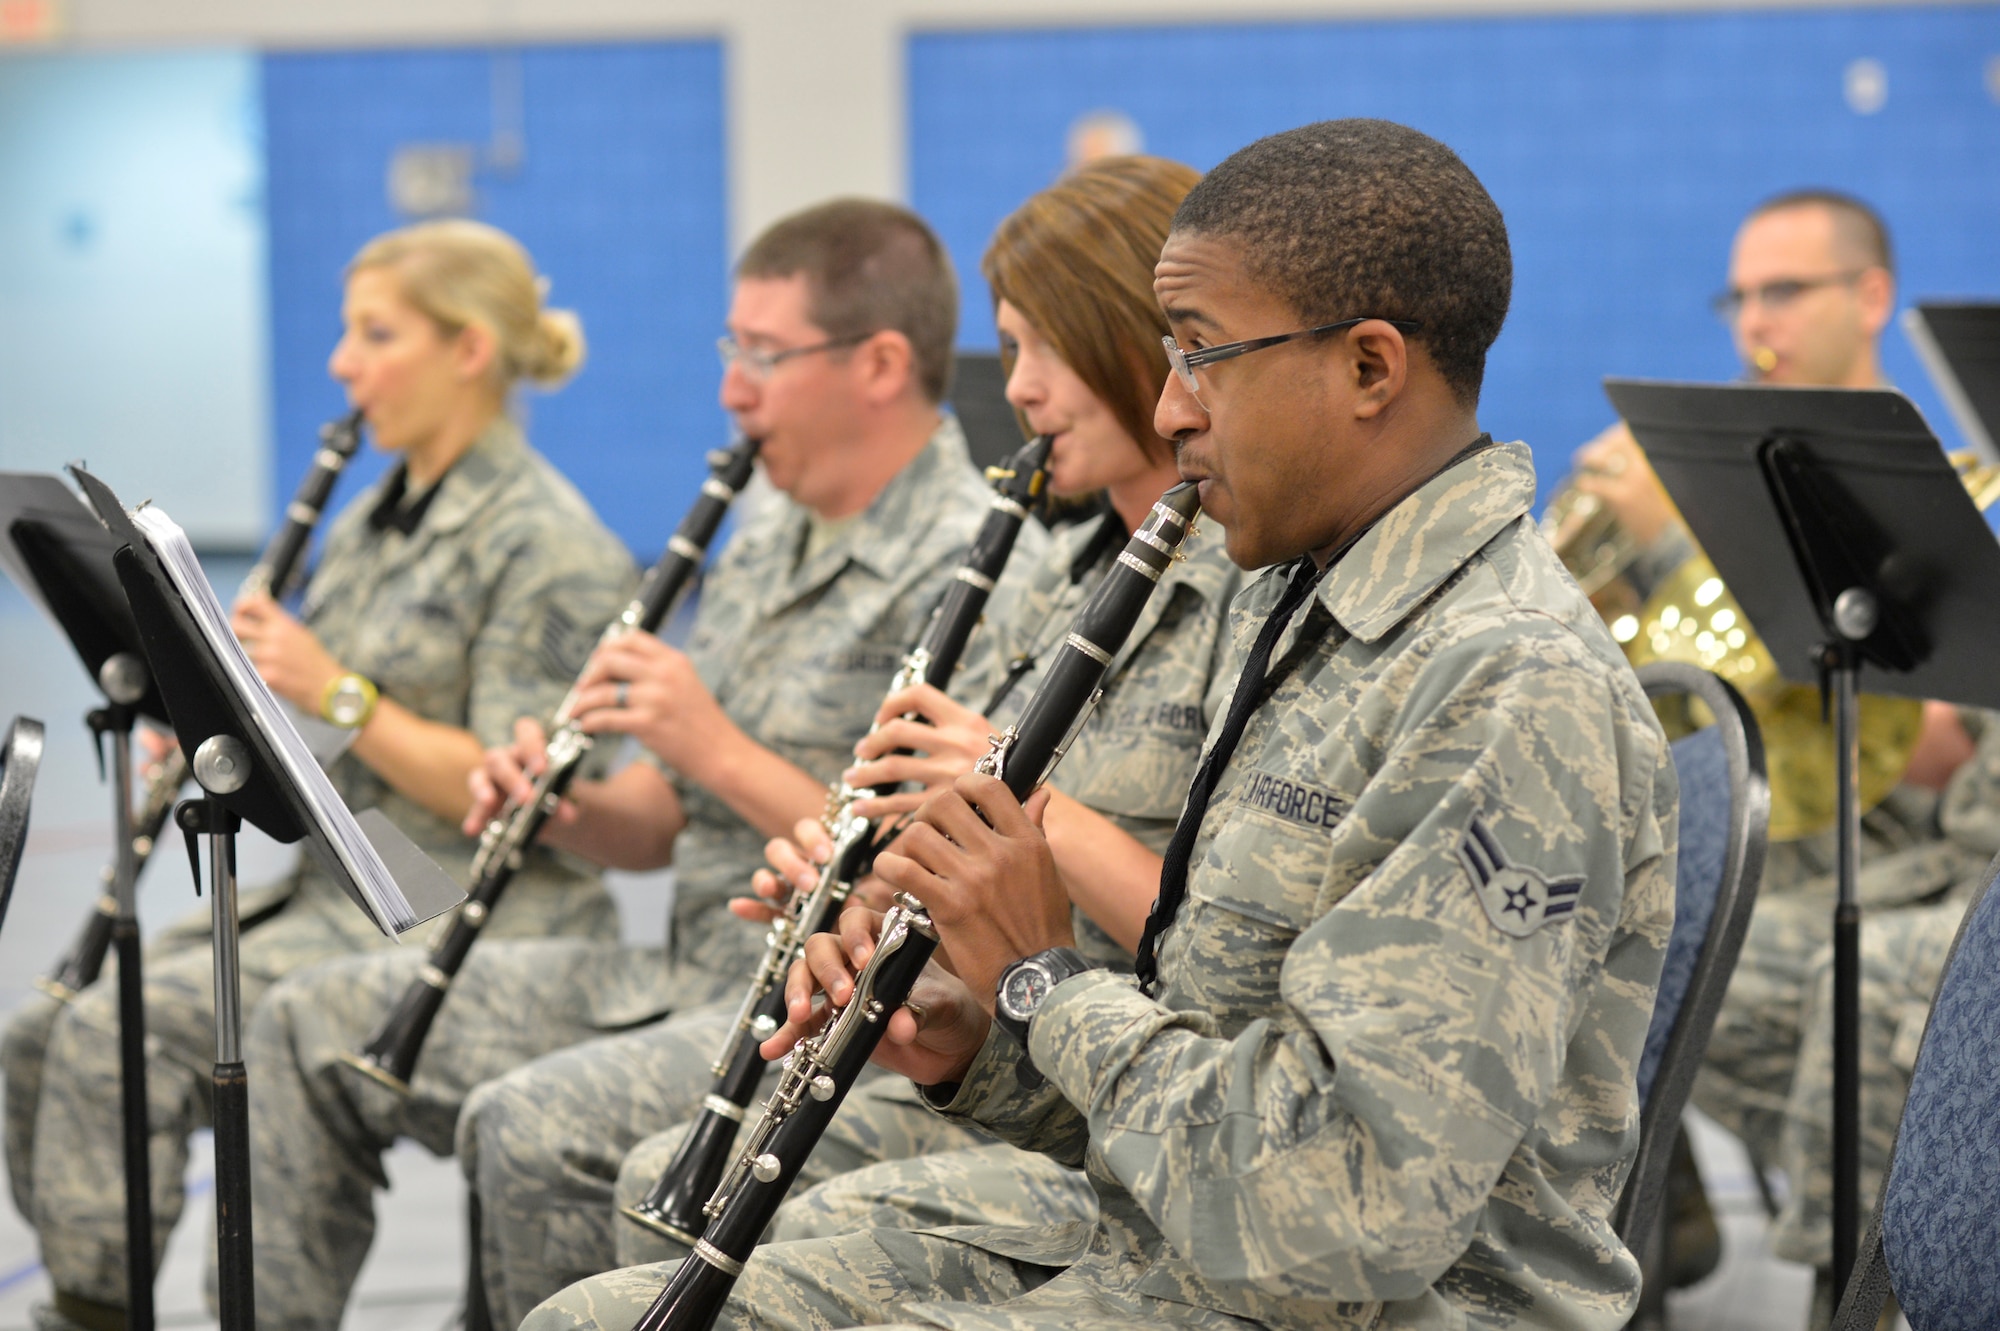 MCGHEE TYSON AIR NATIONAL GUARD BASE, Tenn. - The Air National Guard's foremost 572nd Air Force Band, or "Band of the South" - its 41 musicians - perform their final practice session at the I.G. Brown Training and Education Center's Wilson Hall here May 28, before they kick off a fresh and tuneful, summer 2014 tour. The Band of the South will appear for nearly a dozen, toe-tapping concerts June 28 through July 4, including Virginia Beach, Va., Charleston Harbor, S.C., and Panama City Beach, Fla.  (U.S. Air National Guard photo by Master Sgt. Kurt Skoglund/Released)